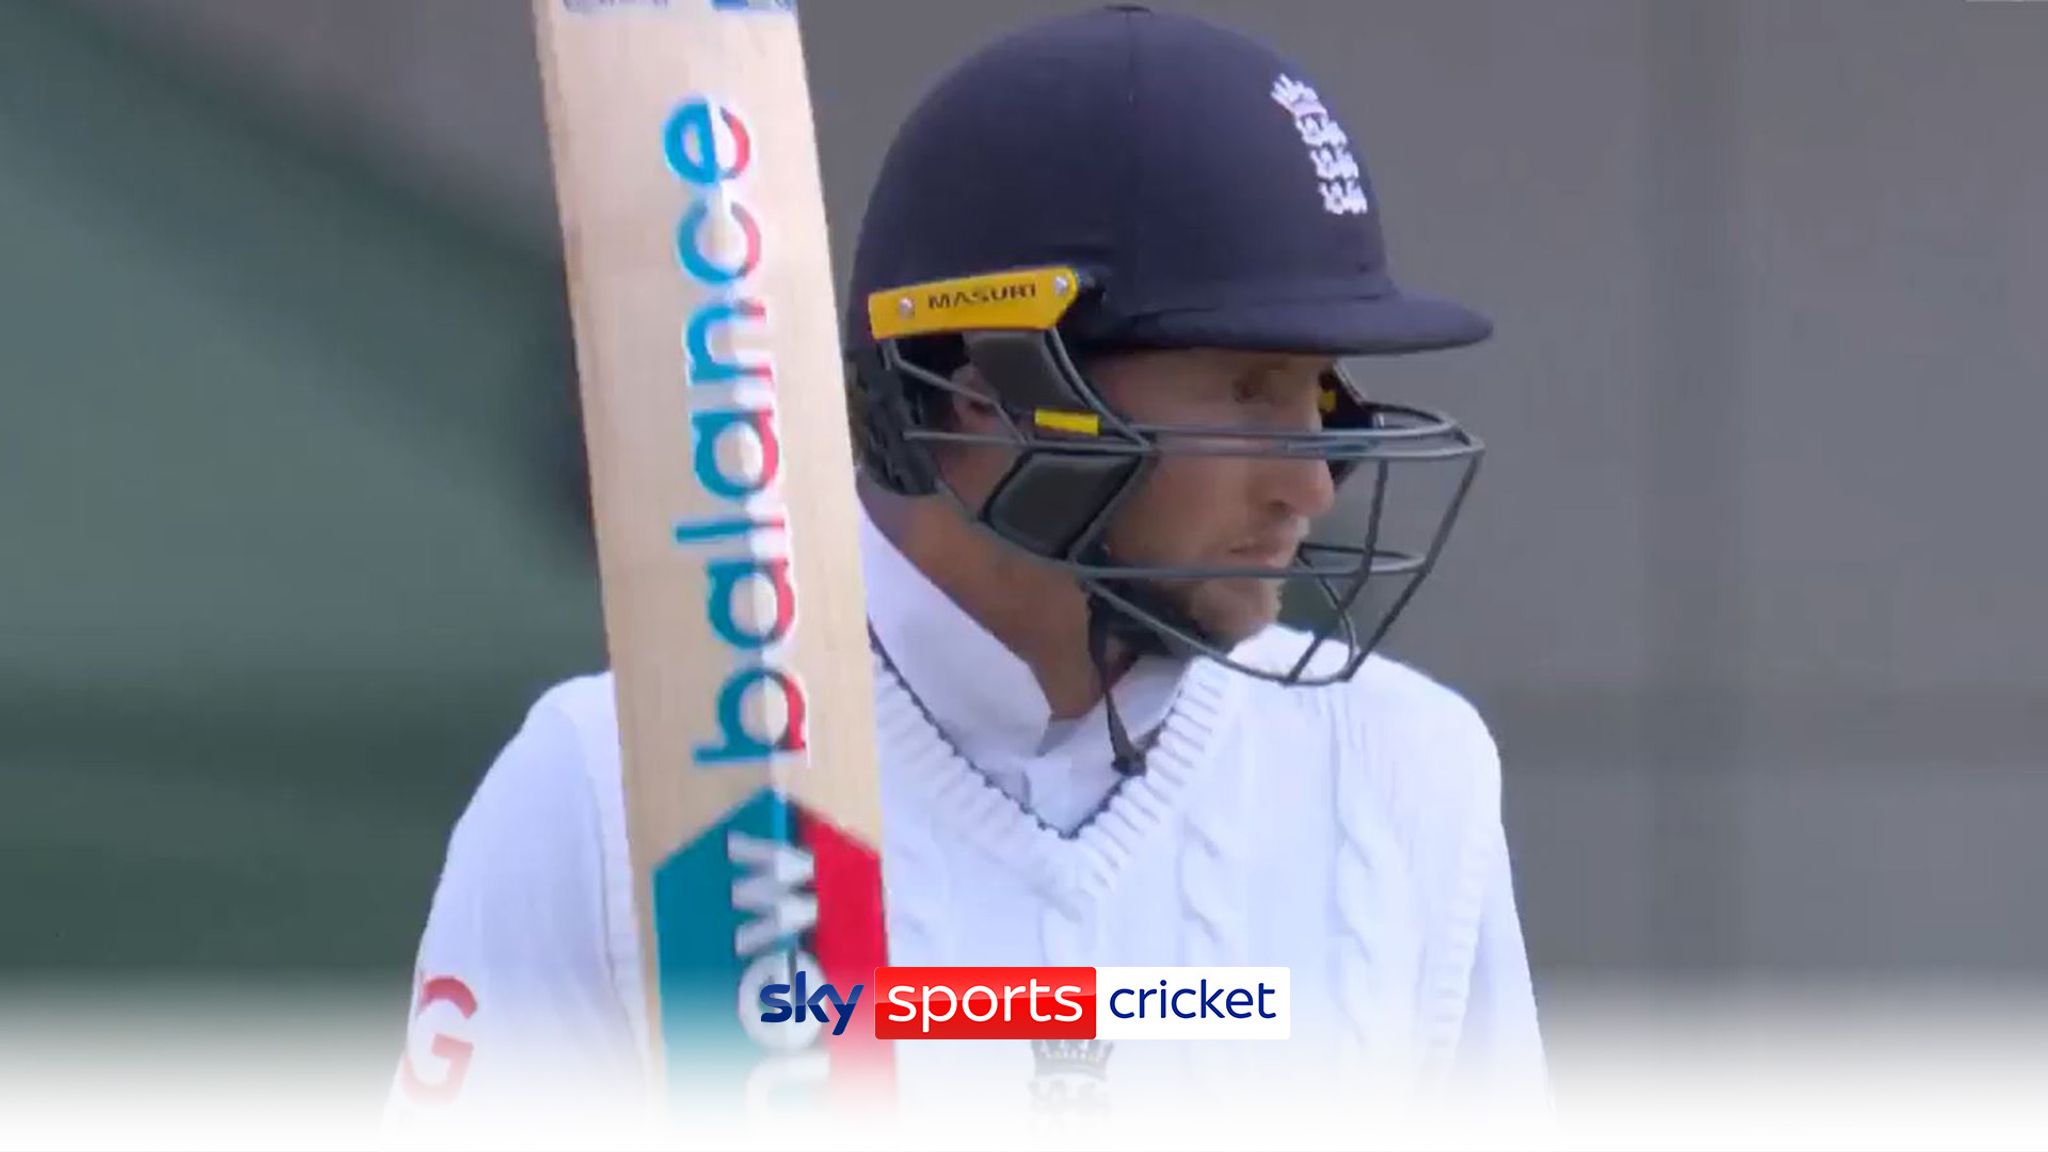 No respect whatsoever! Joe Root reaches 50 with another ramp shot! Video Watch TV Show Sky Sports